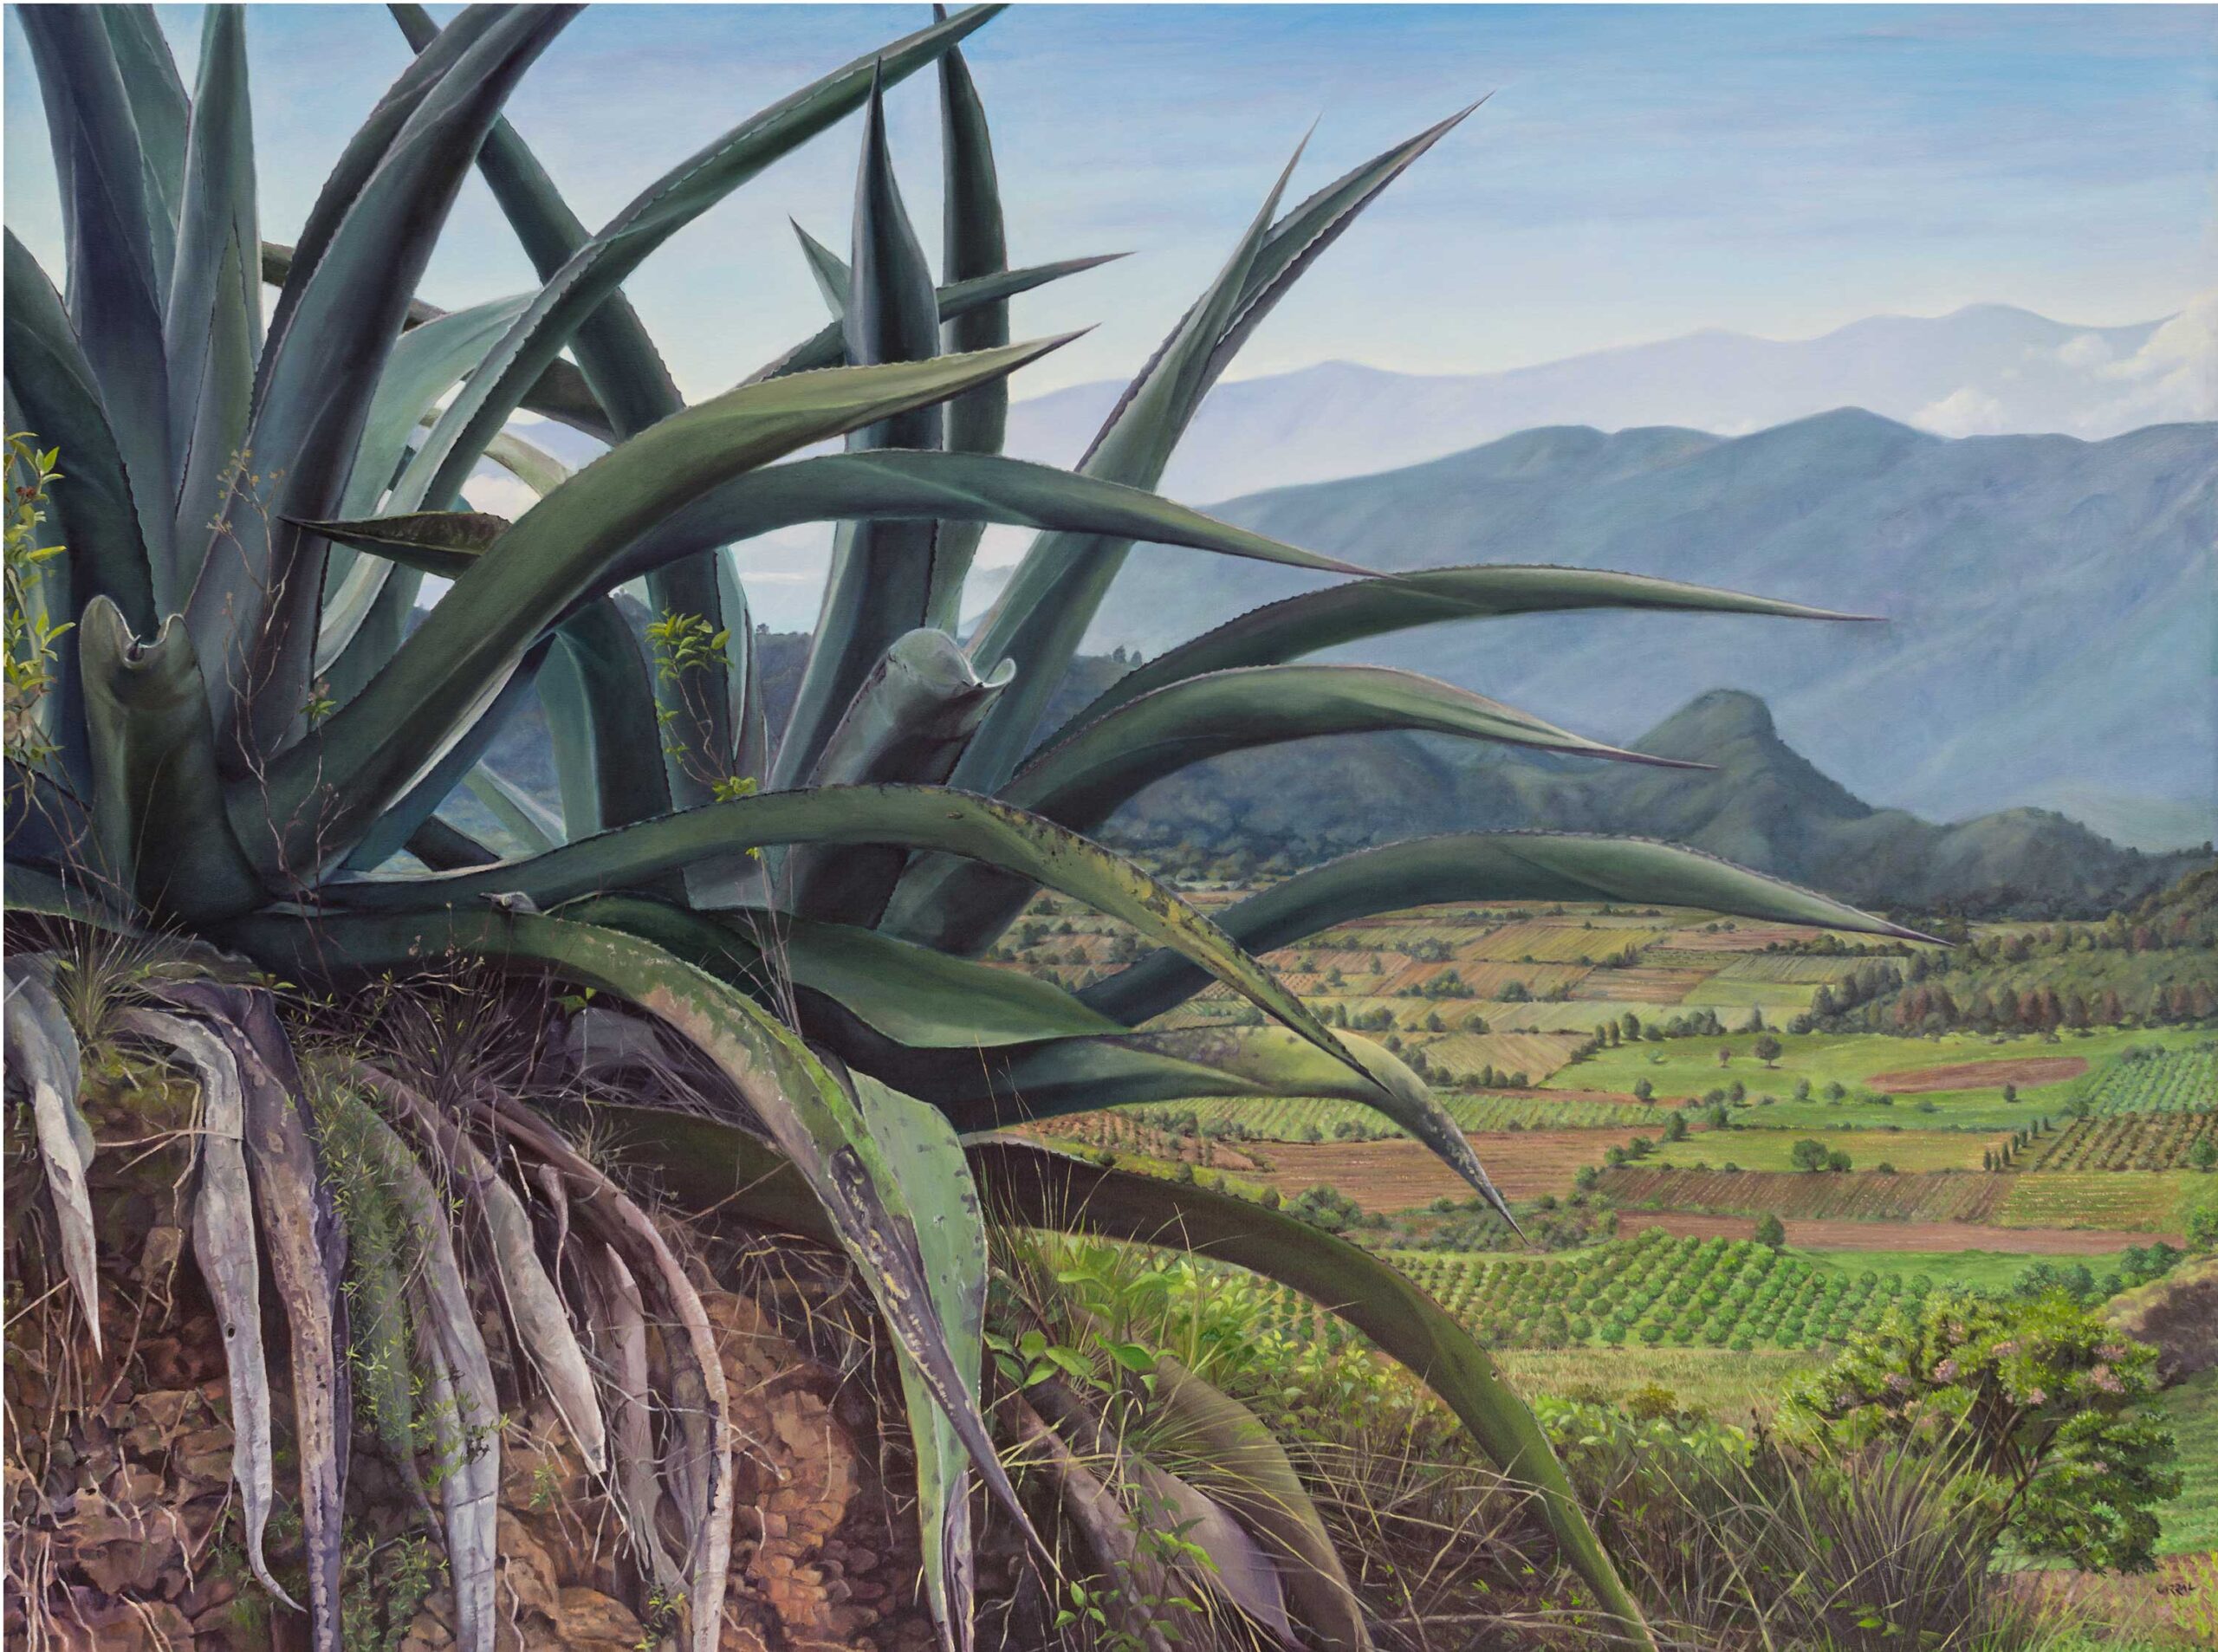 Jorge Carral, "Los Guardas (The Guardians)," 2012, oil on canvas, 47 x 63 in., private collection, Mexico City